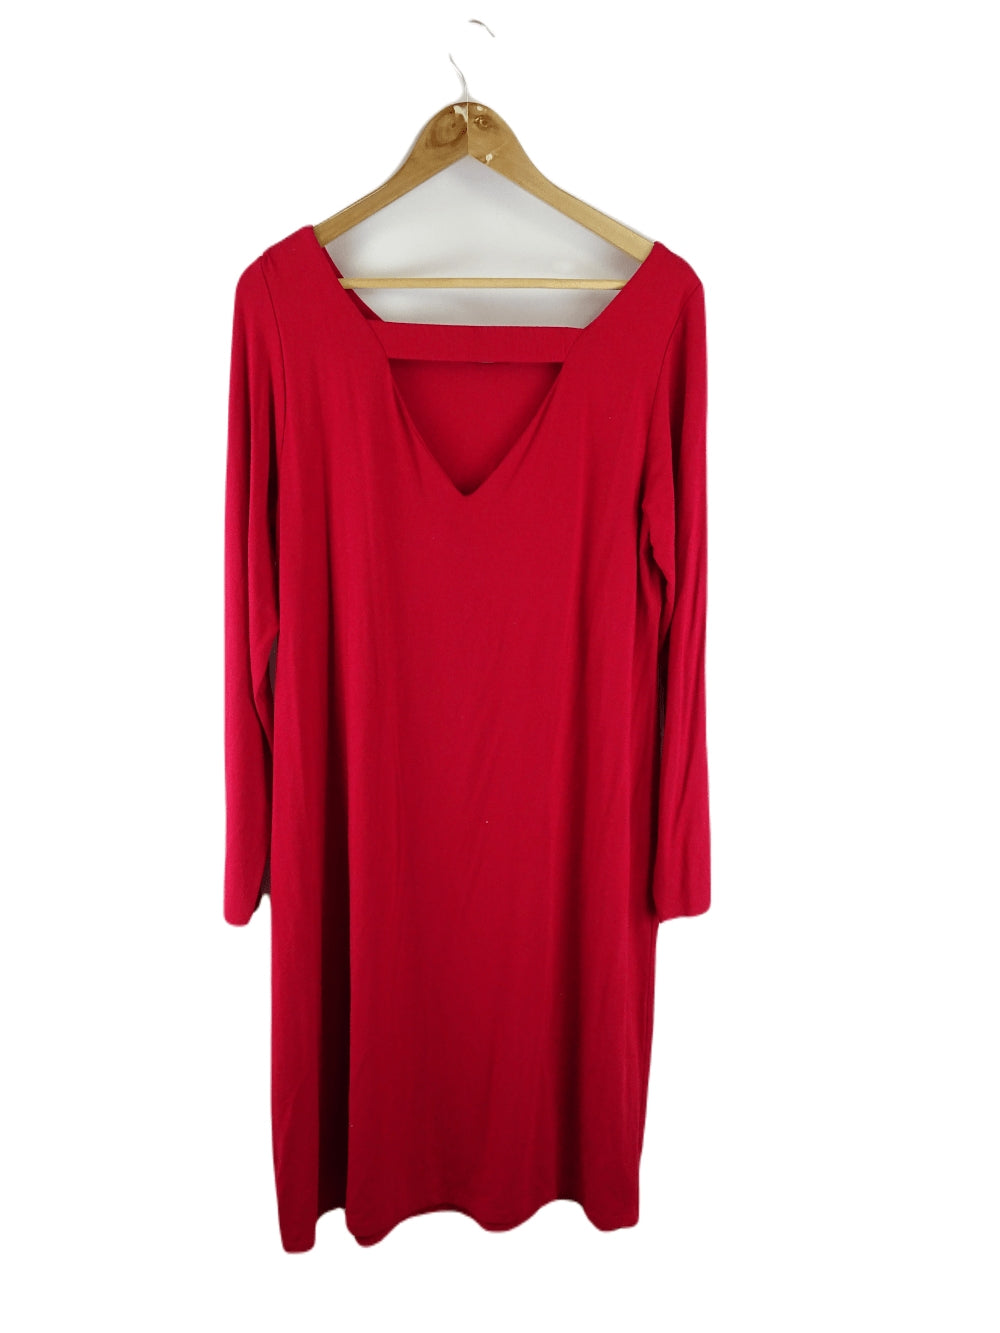 Eileen Fisher Red Dress L